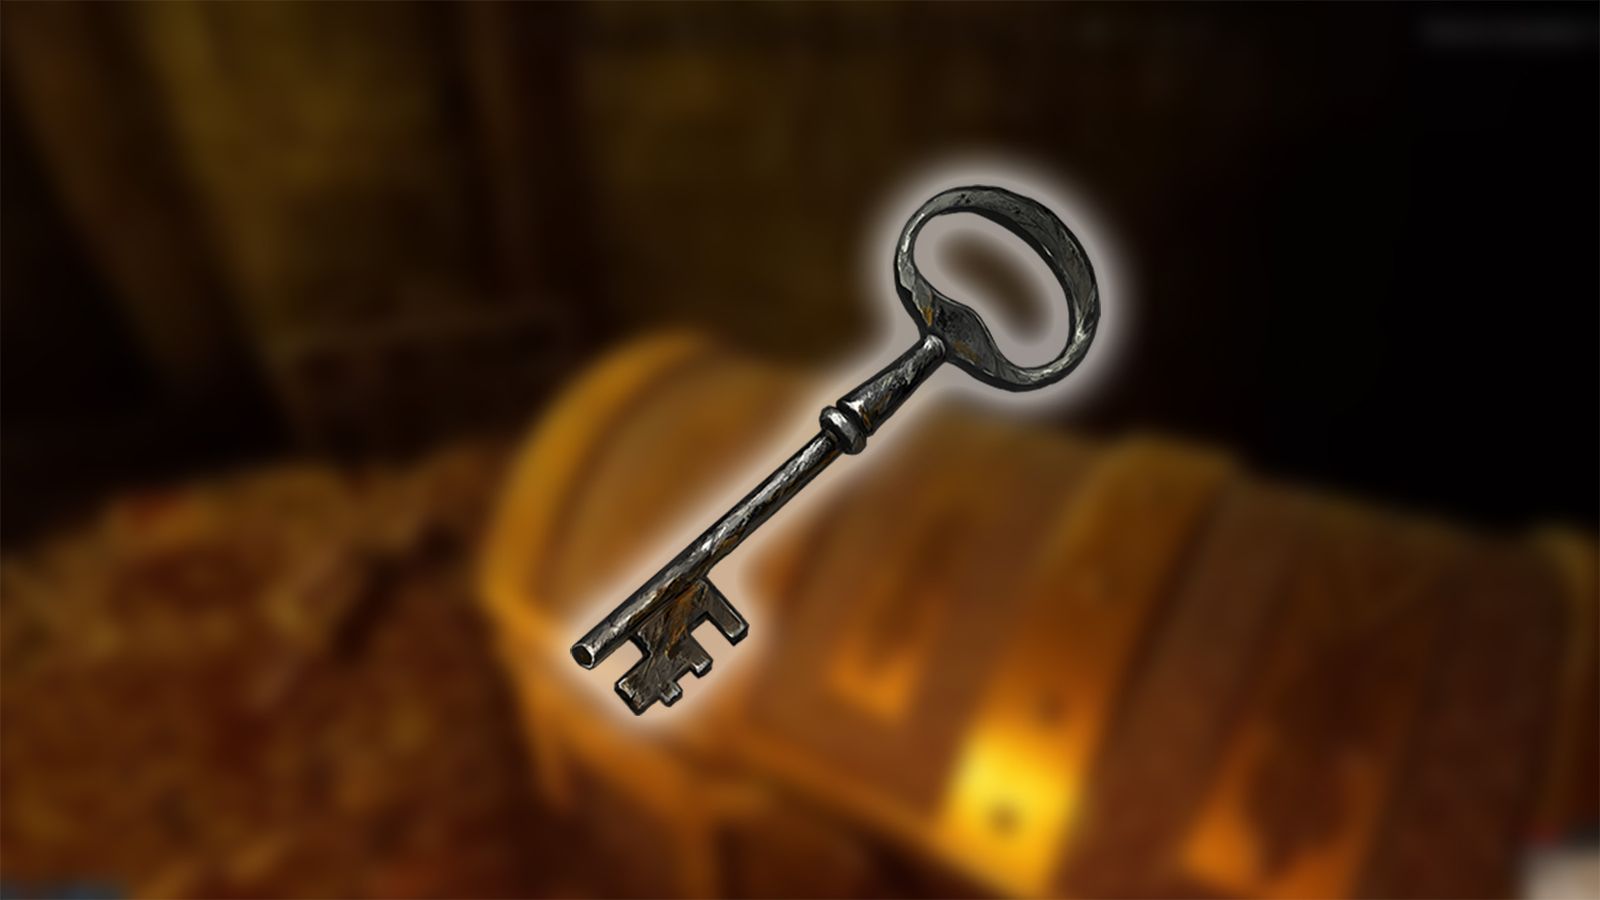 An image of an Old Rusty Key against a backdrop of treasure in Dark and Darker.